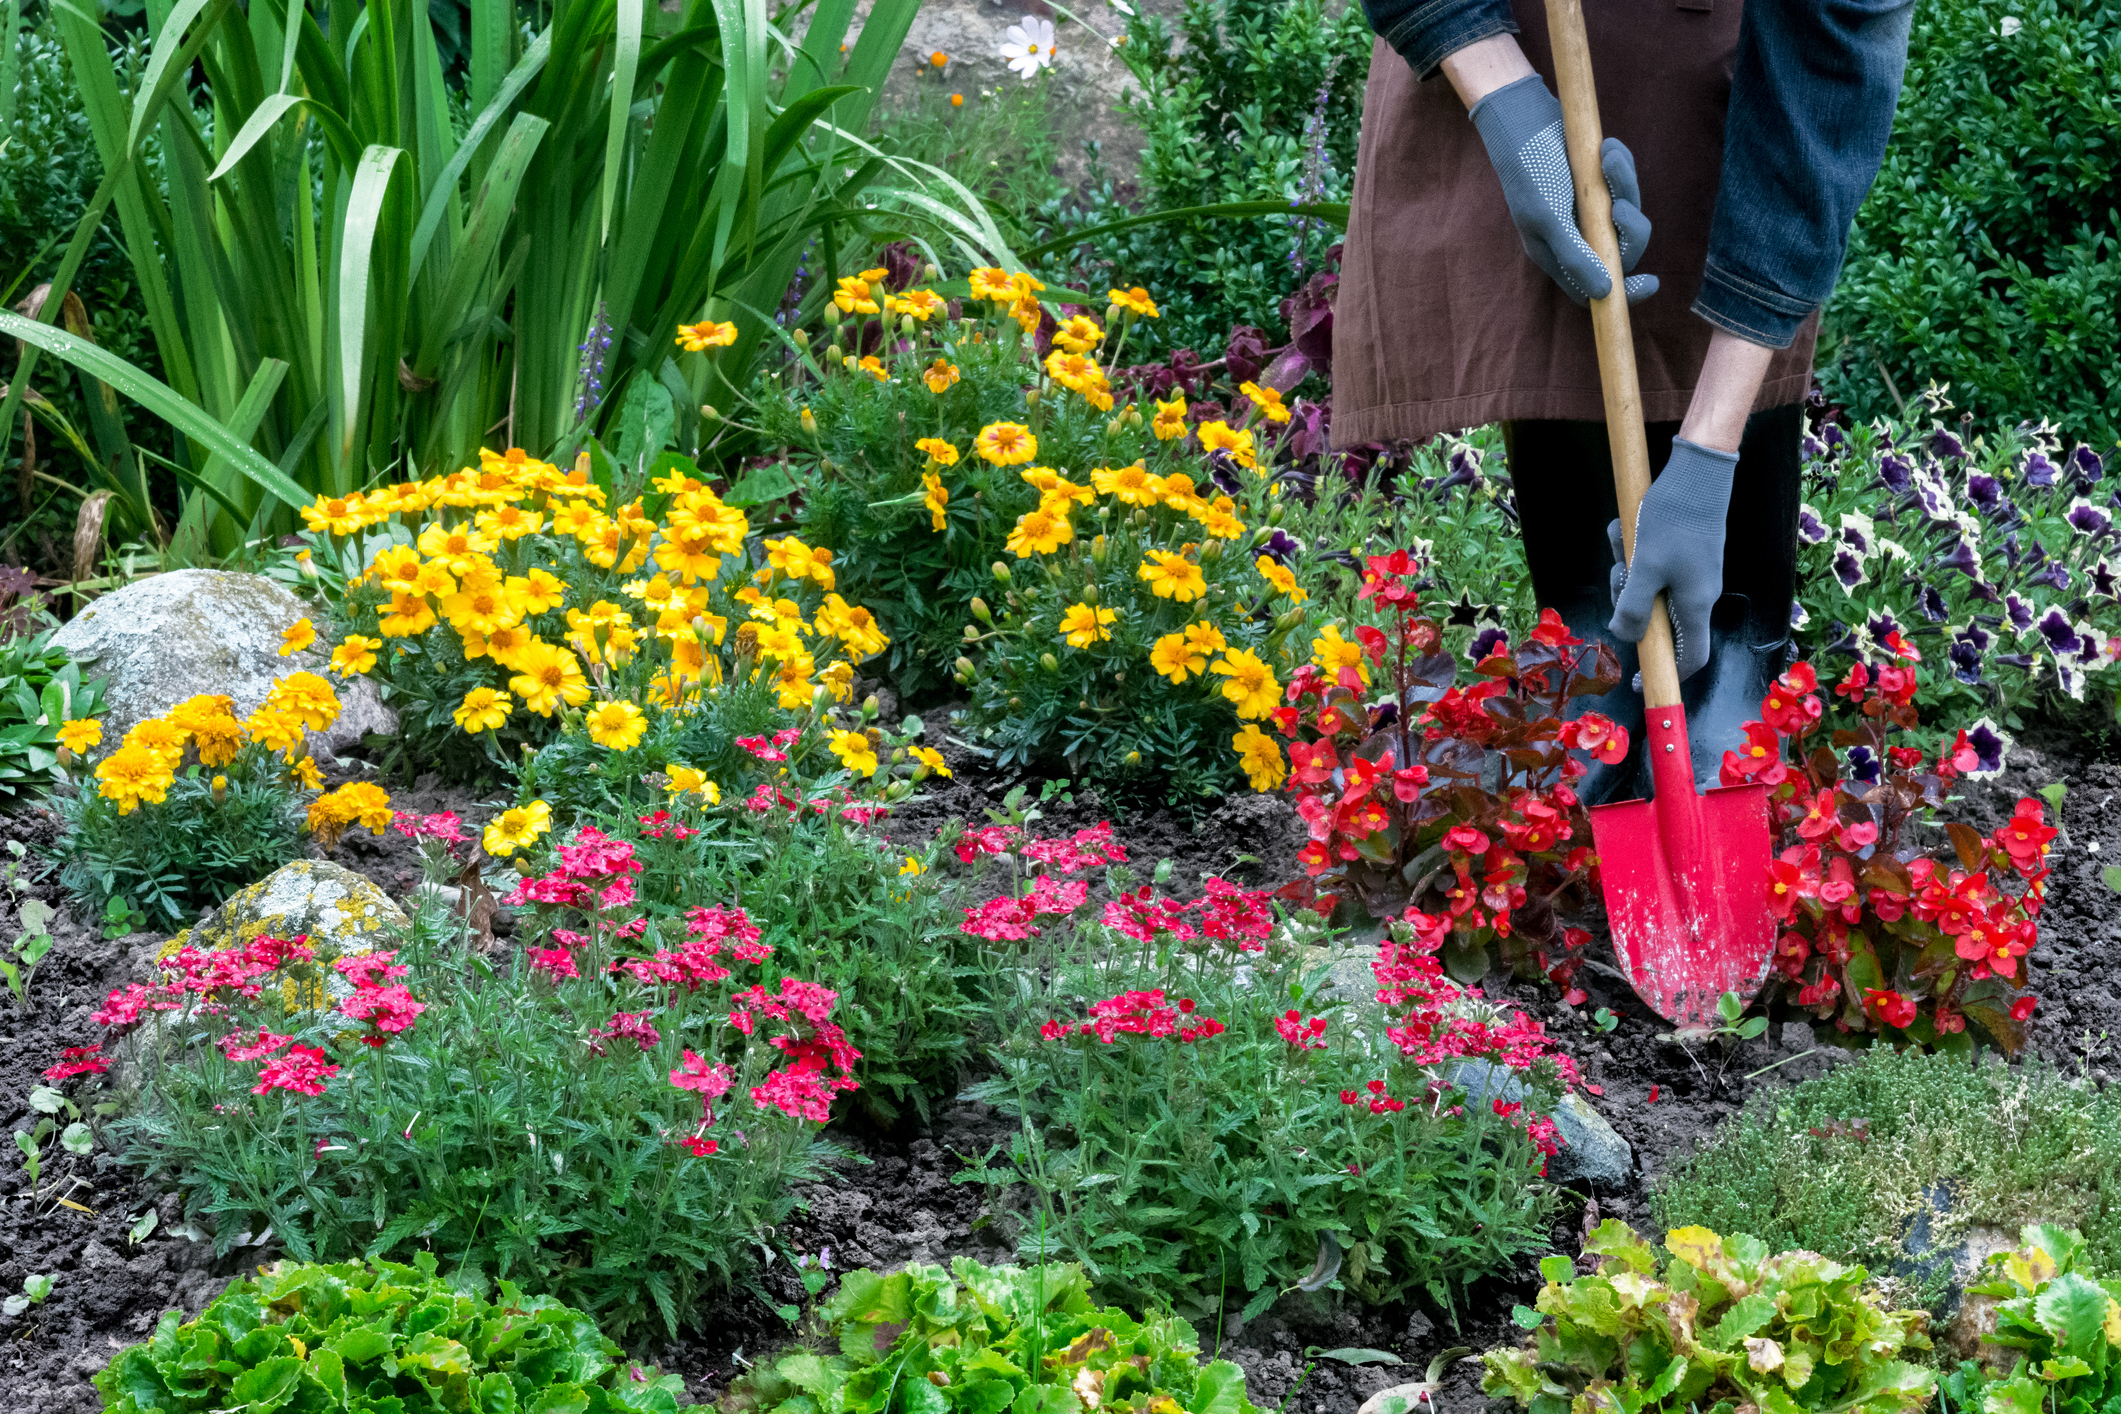 A woman shovels dirt in the flower bed of her garden.